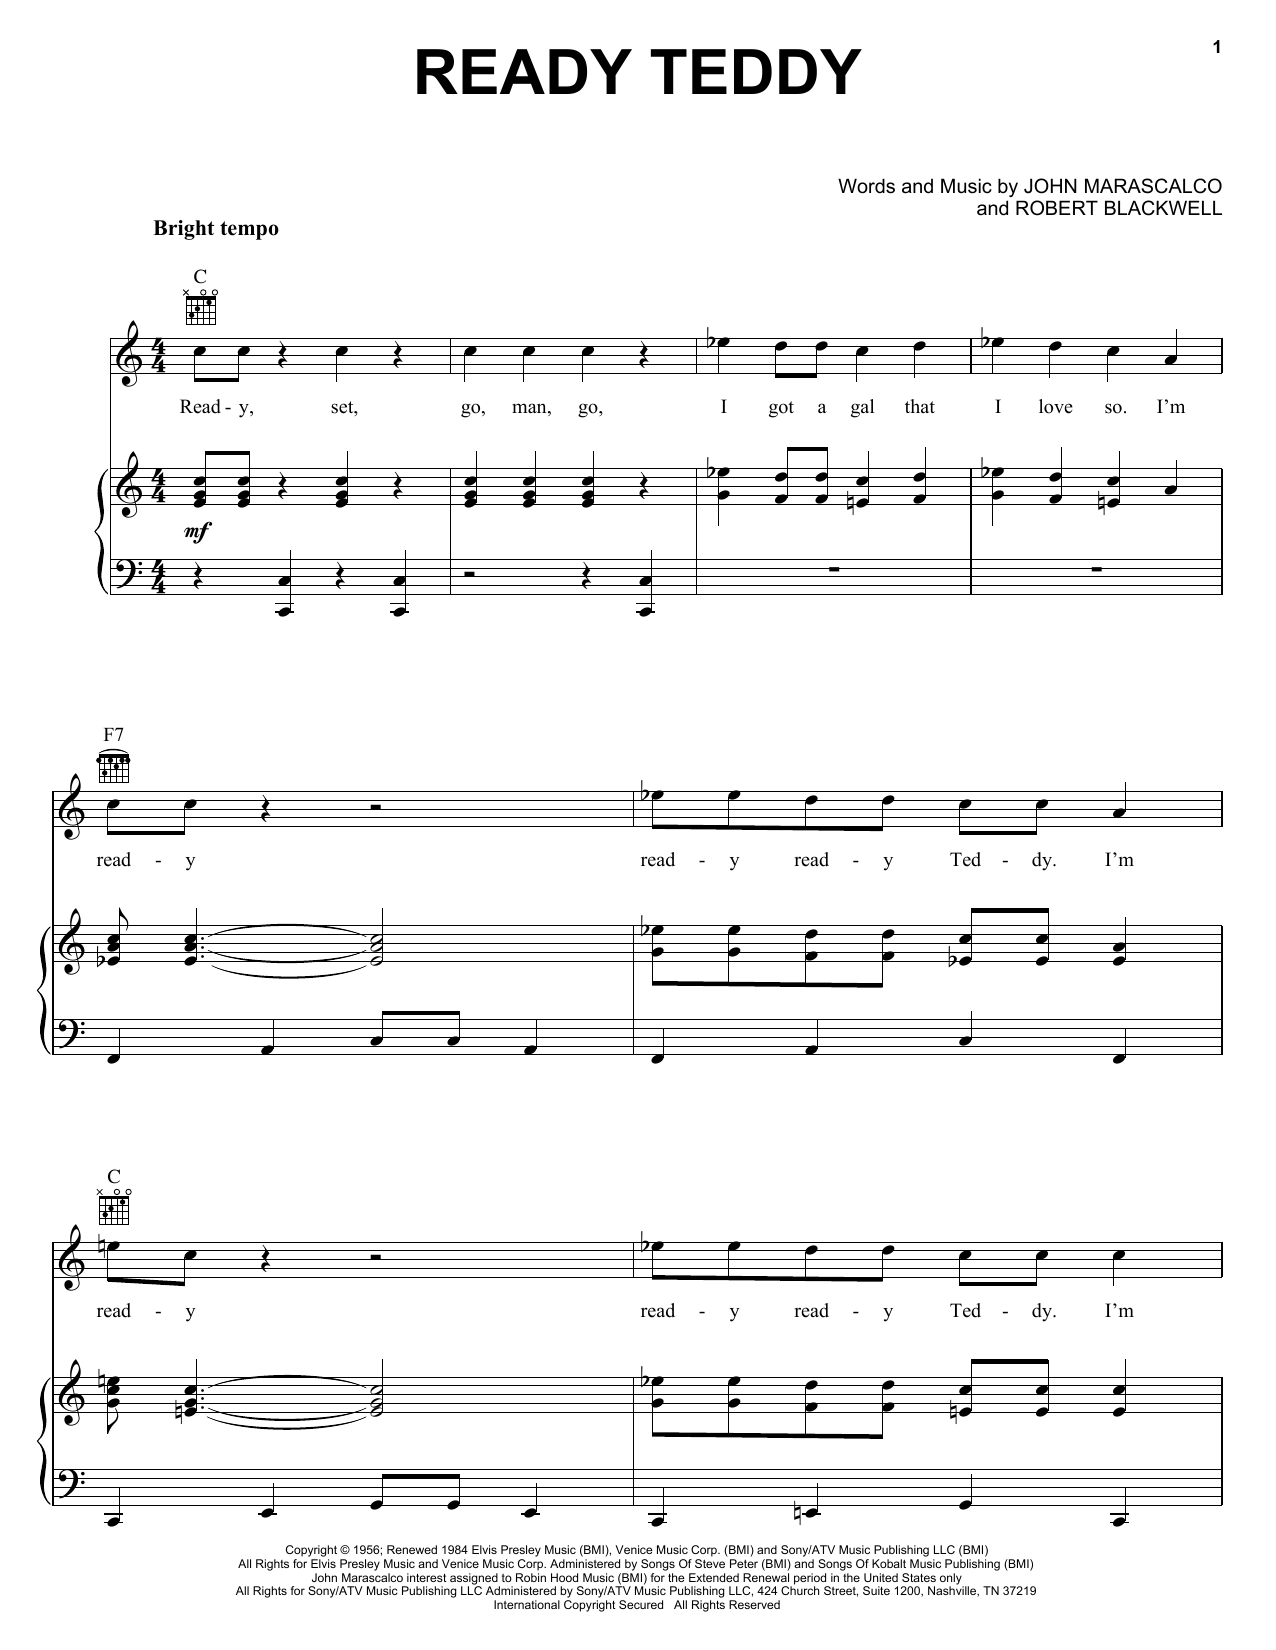 Elvis Presley Ready Teddy sheet music notes and chords. Download Printable PDF.